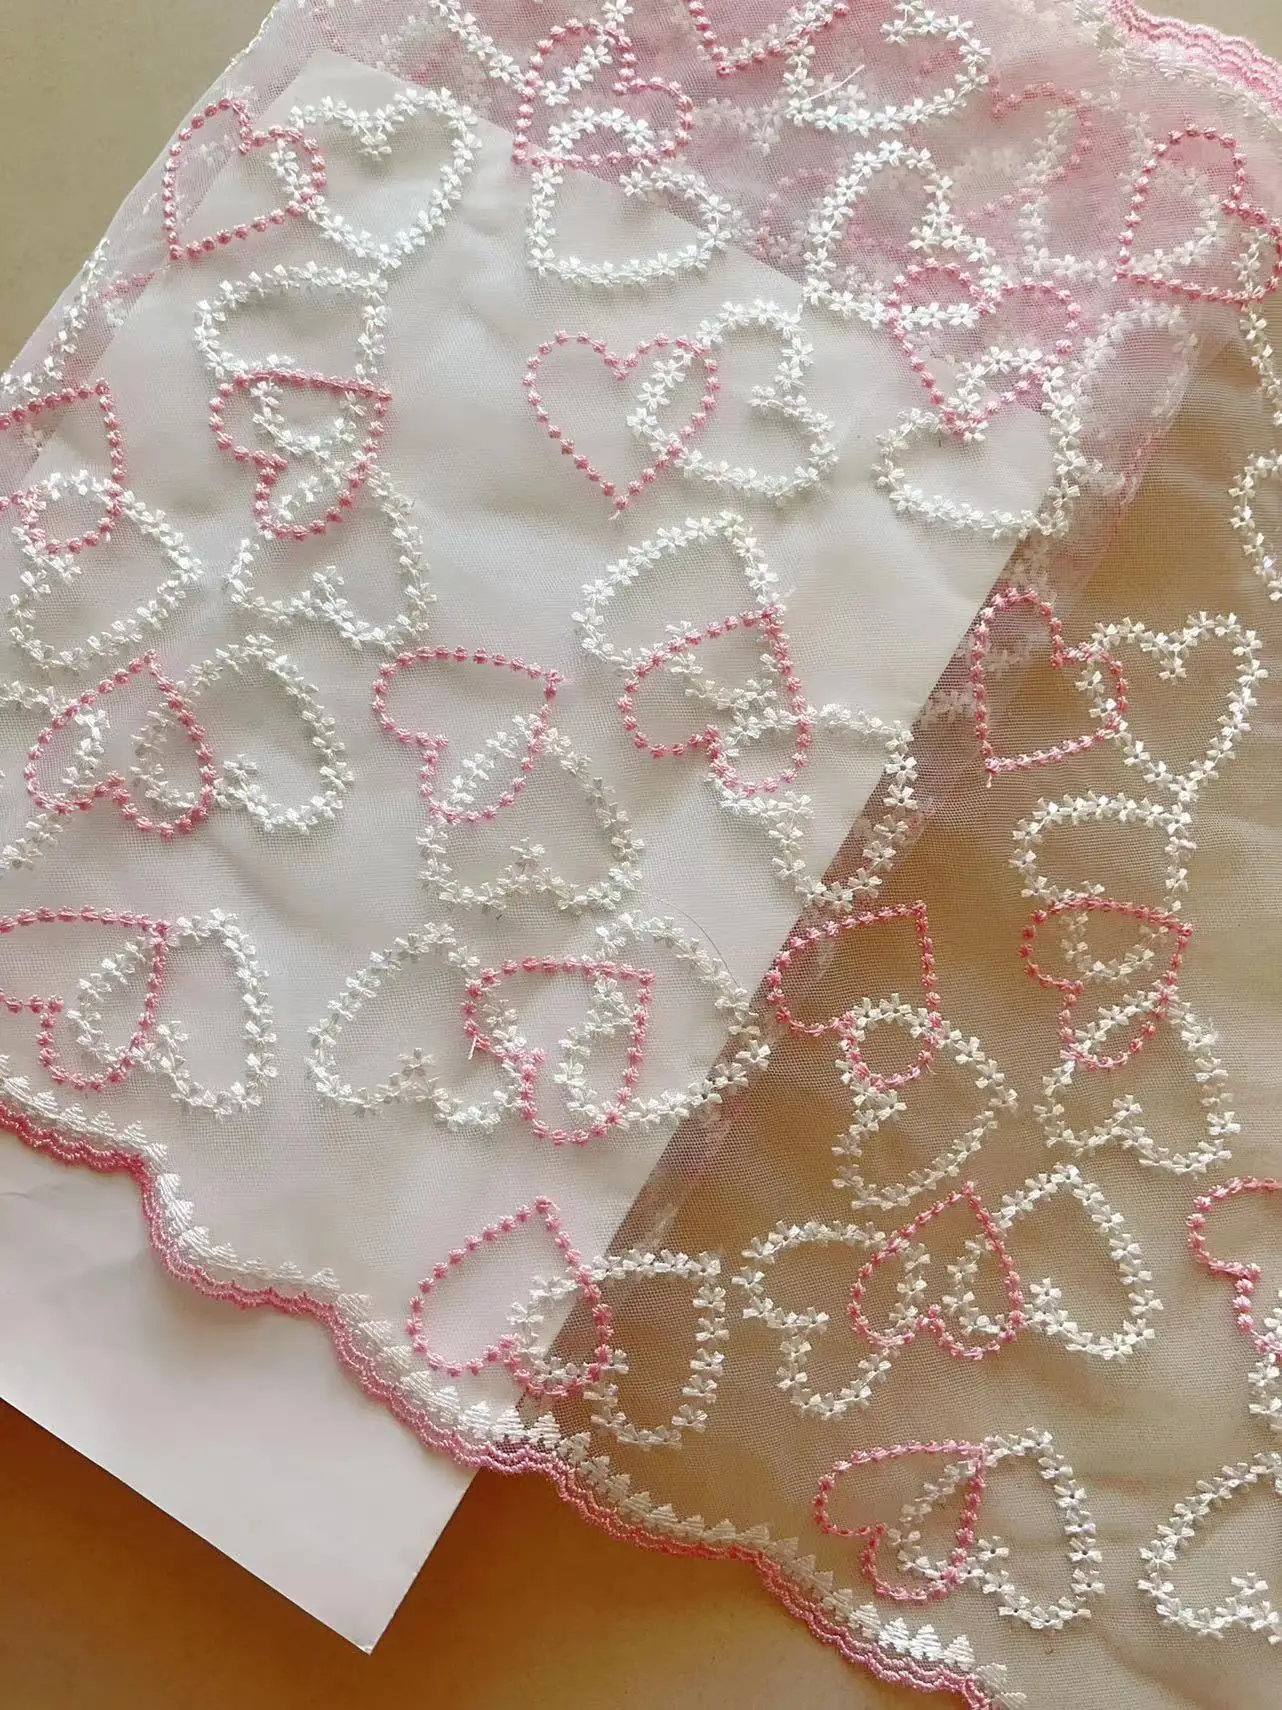 1 Yard Pink Heart Emebroidery Lace Trim DIY Clothing Lace Accessories Embroidered Net Lace for Lingerie Sewing Crafts